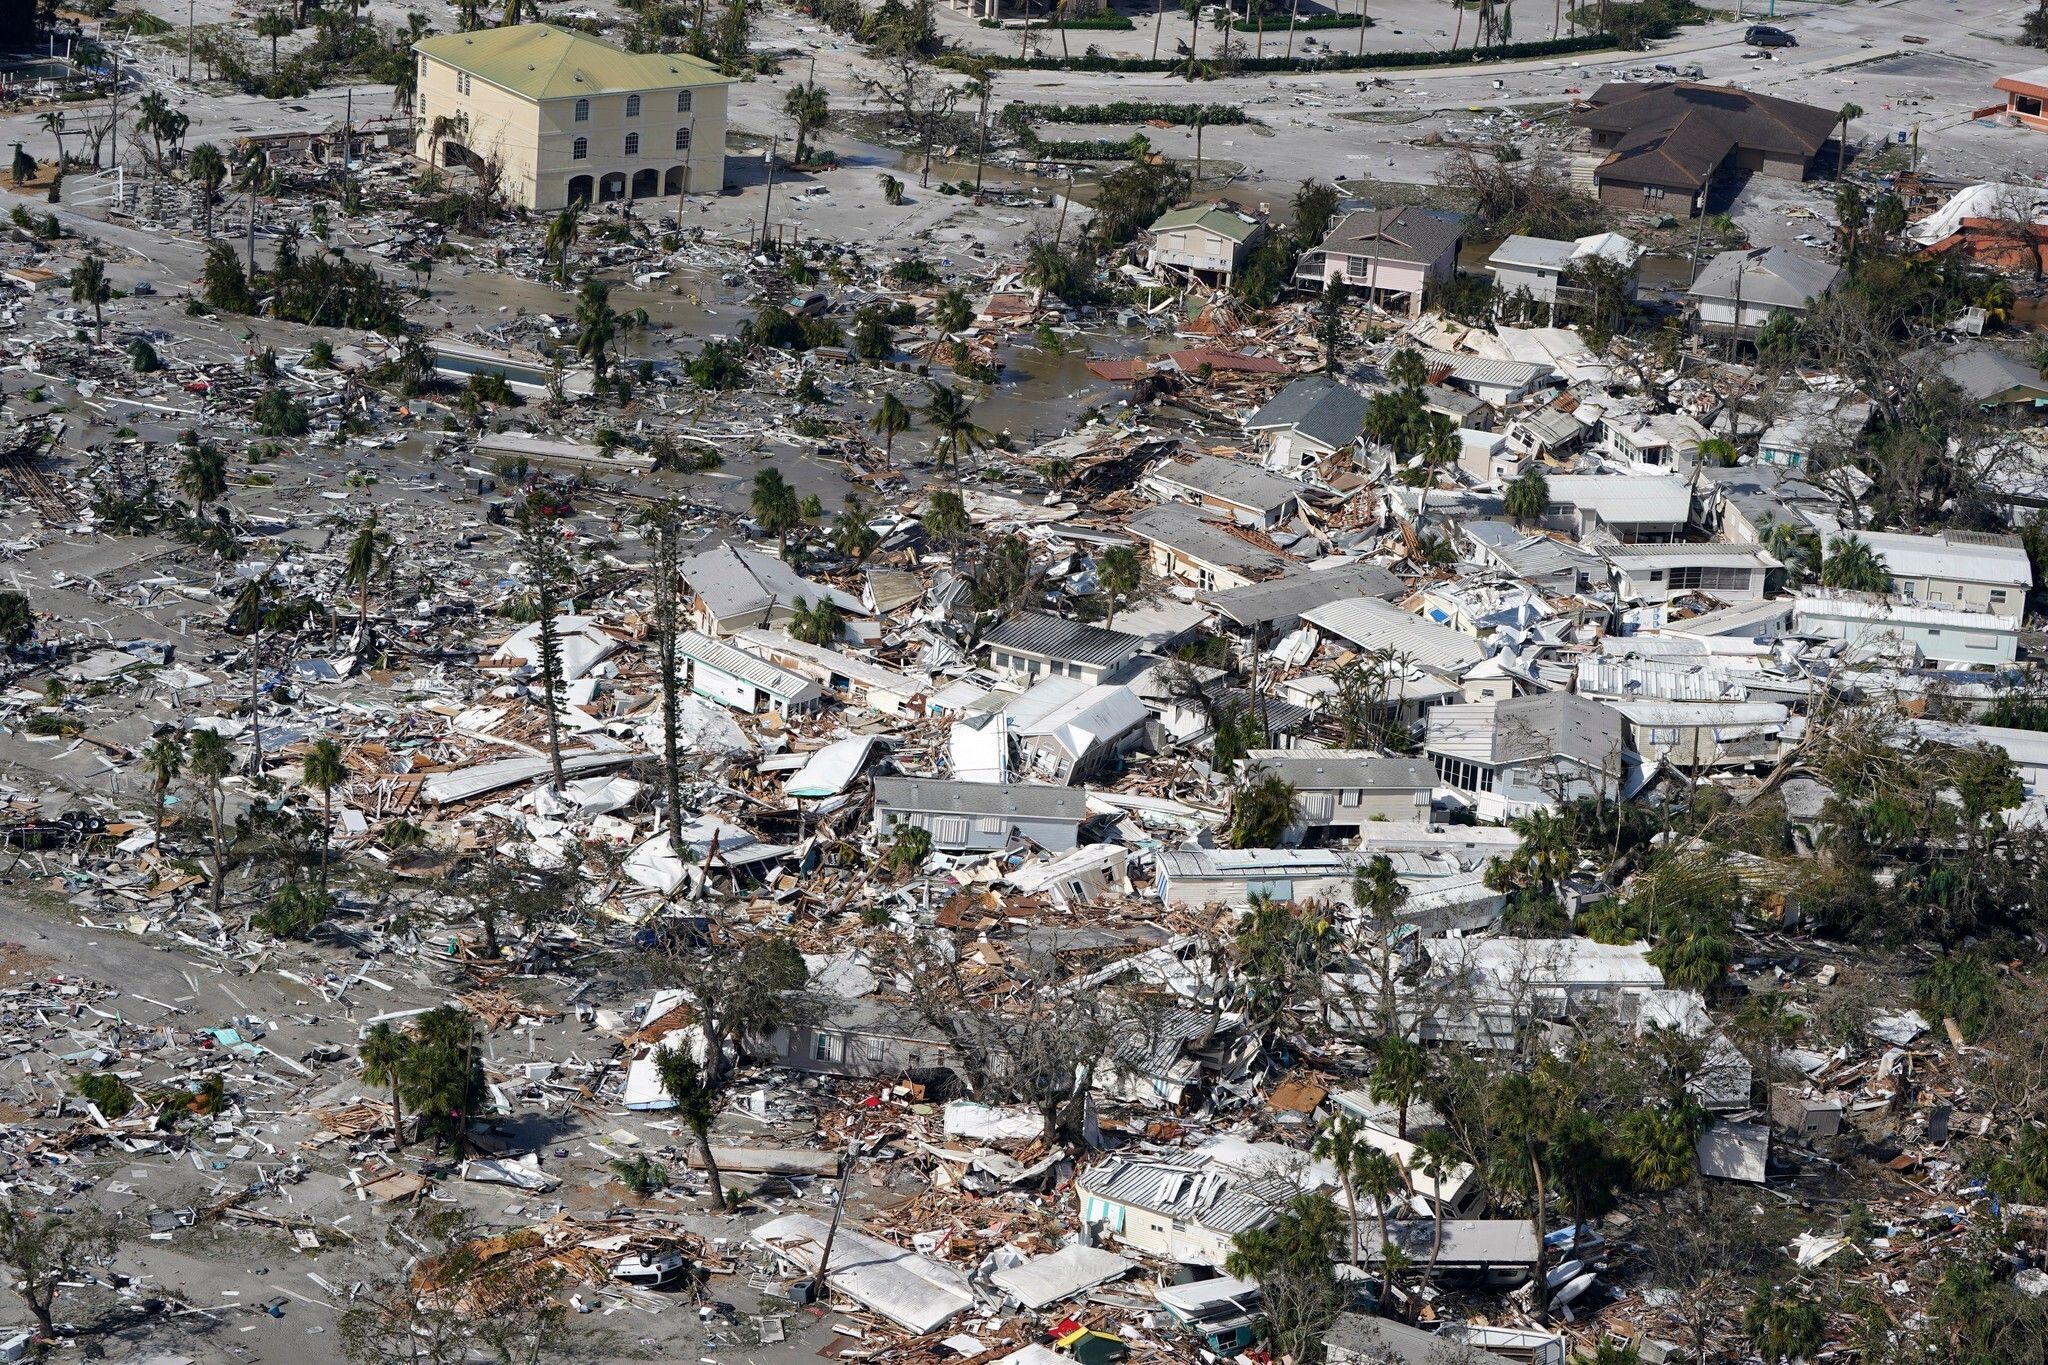 Southwest Florida looks like a war zone in the aftermath of Hurricane Ian.